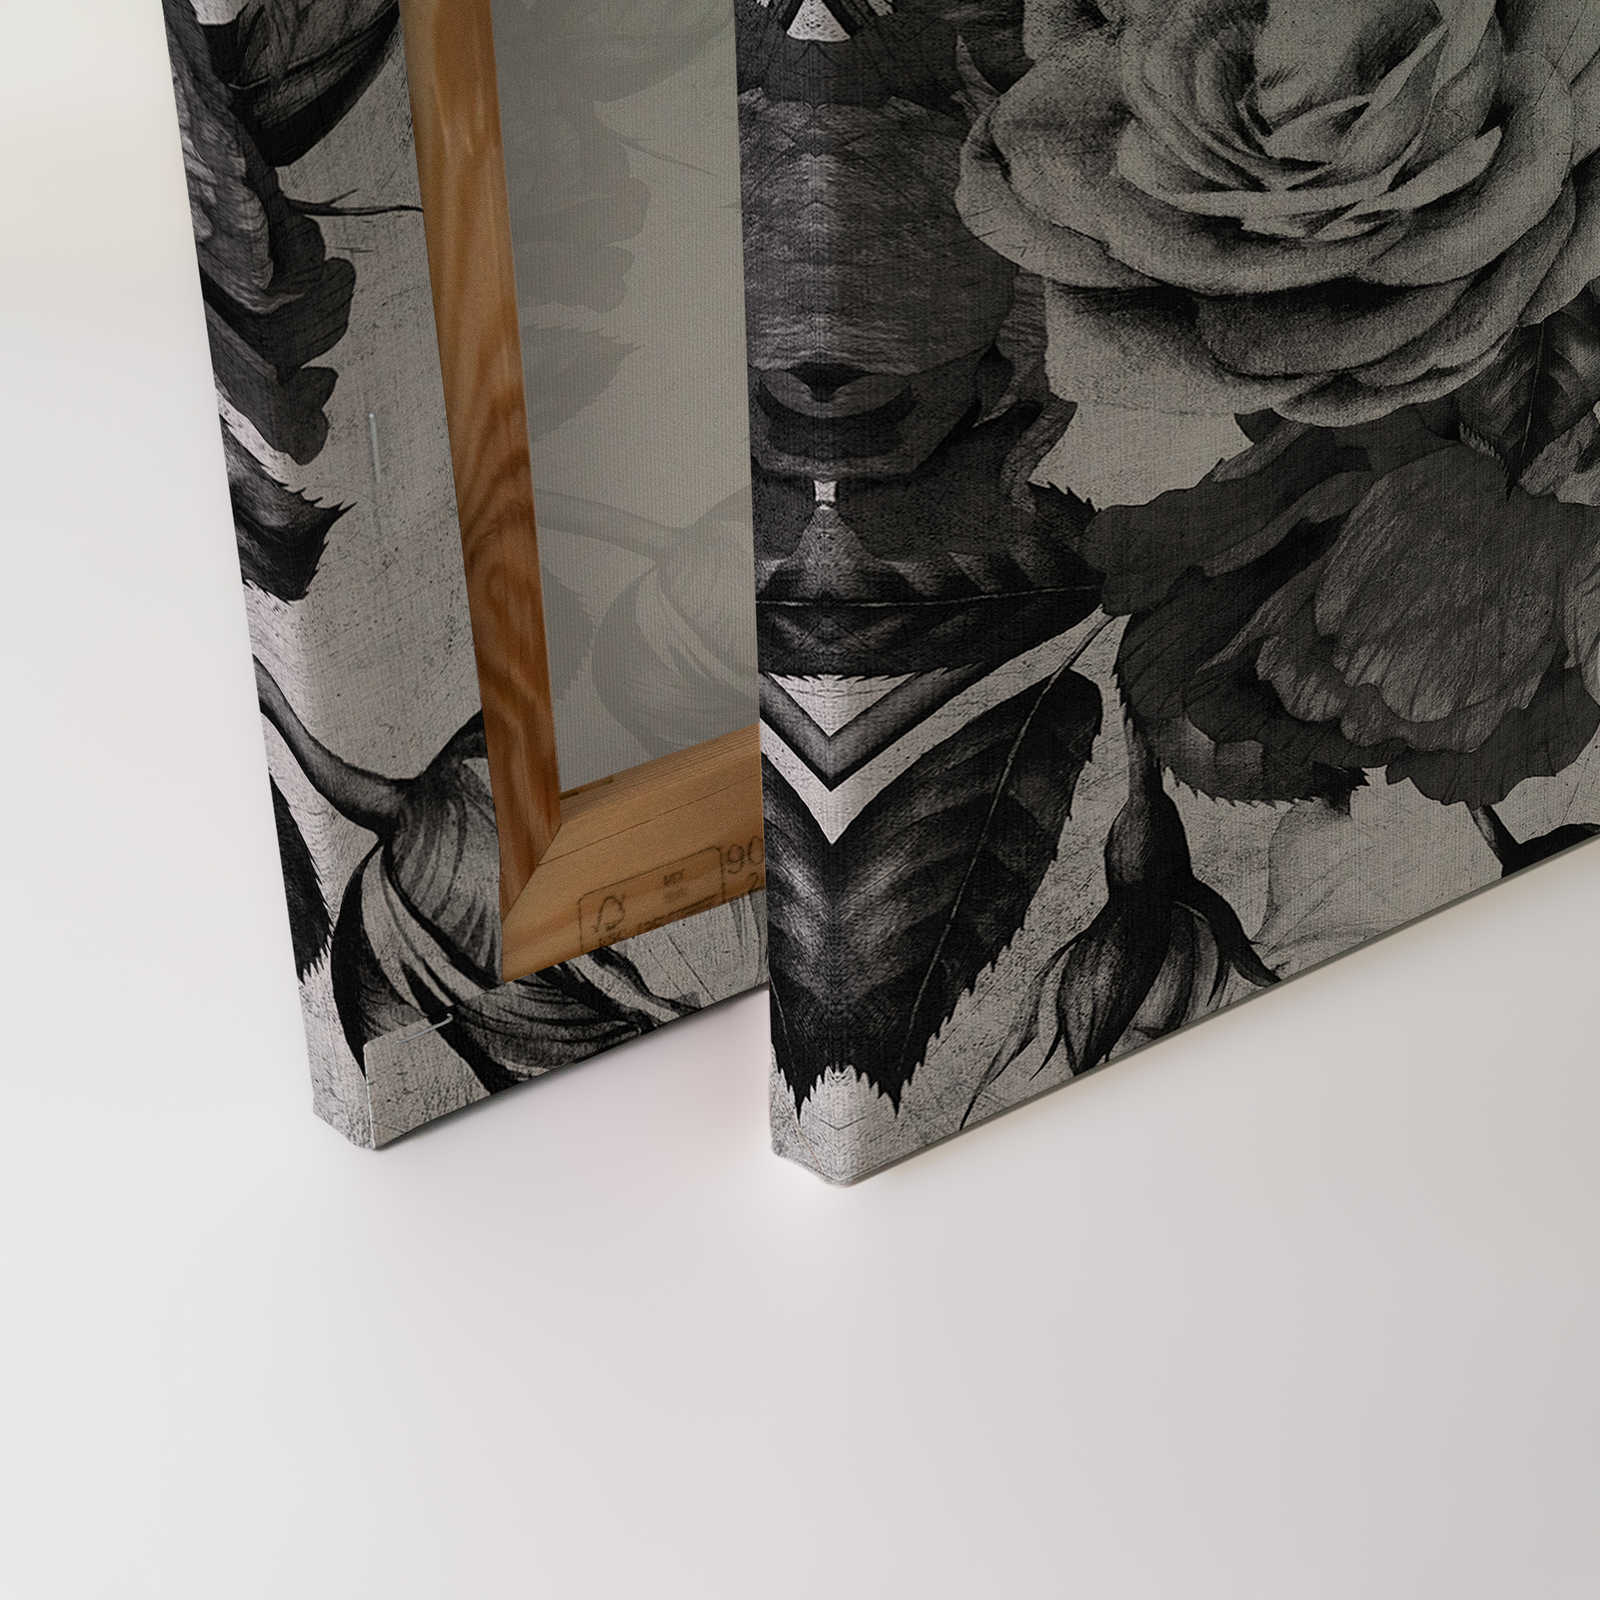             Spanish rose 1 - Roses canvas painting with black and white flowers - 0,90 m x 0,60 m
        